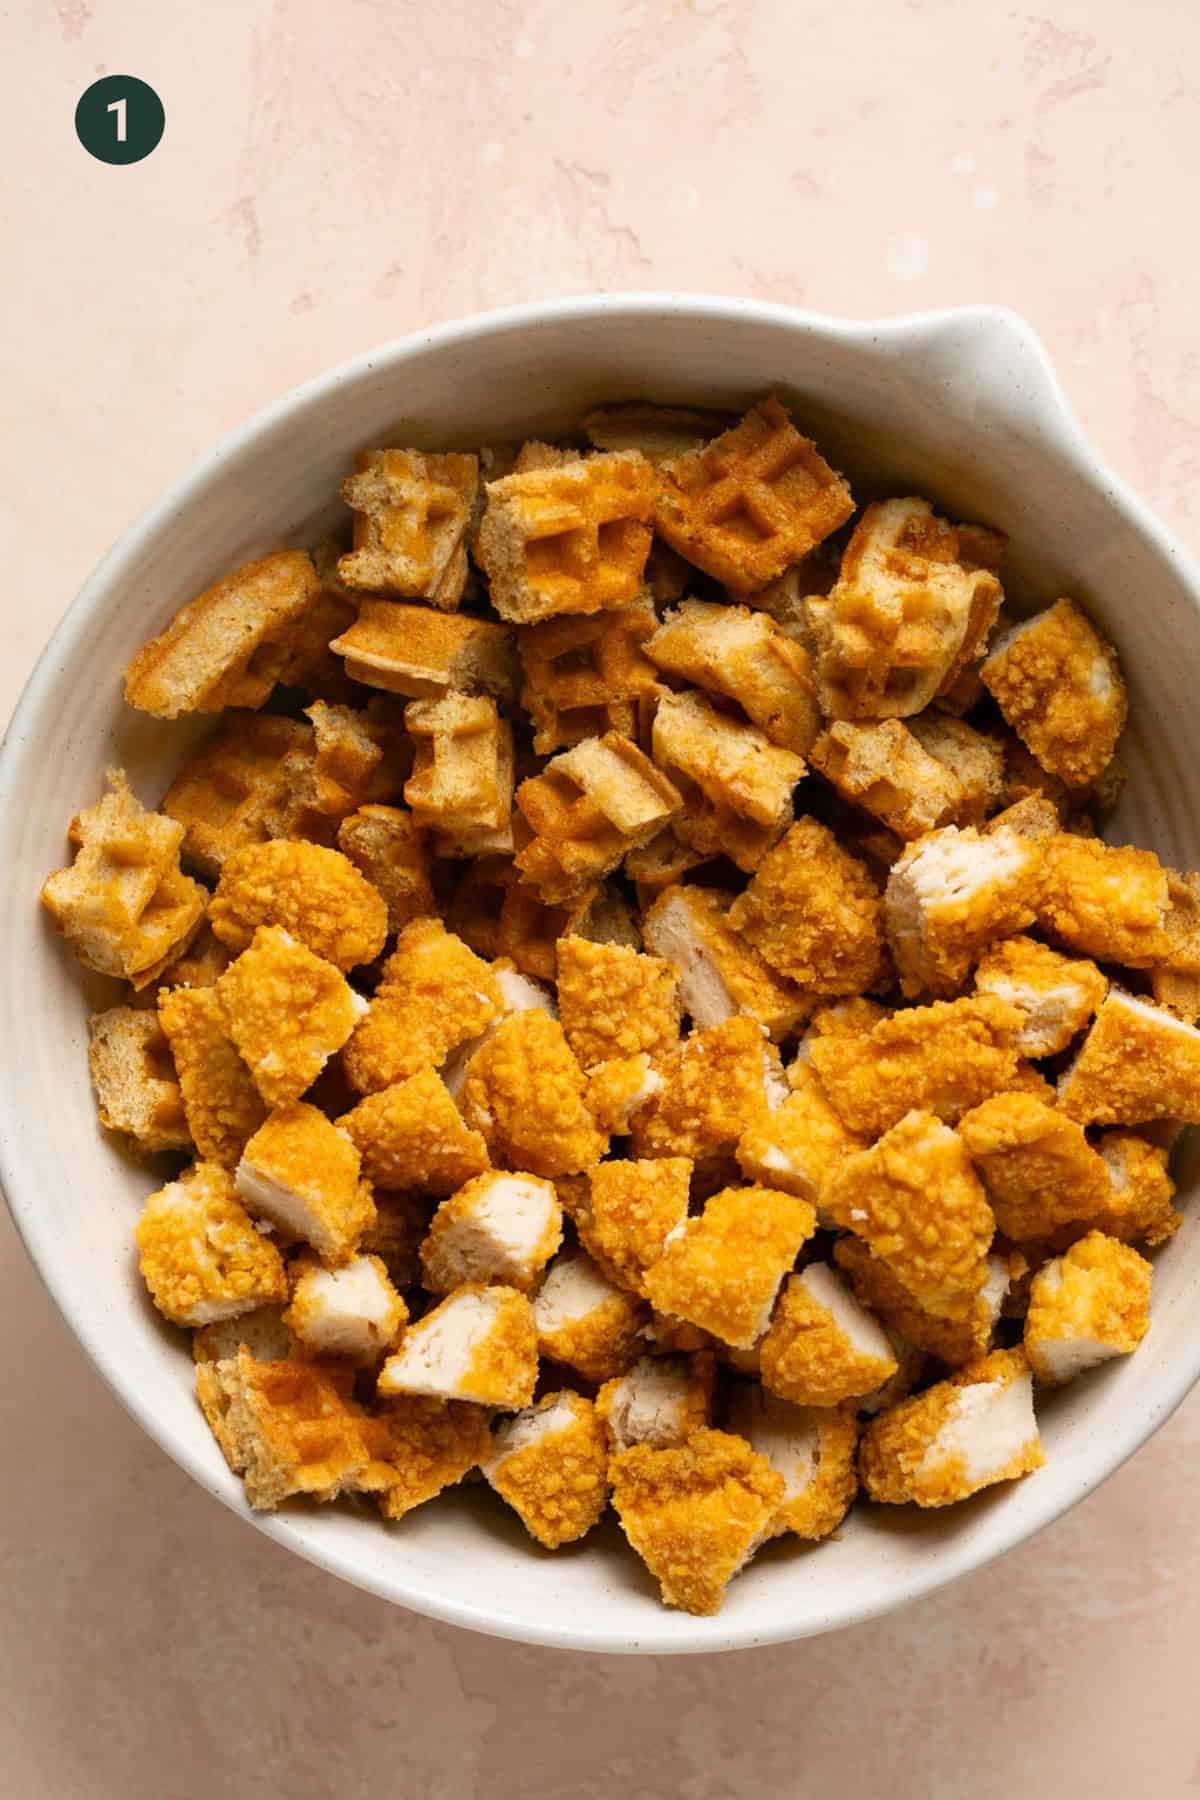 Waffles and chicken nuggets chopped into cubes in a bowl.